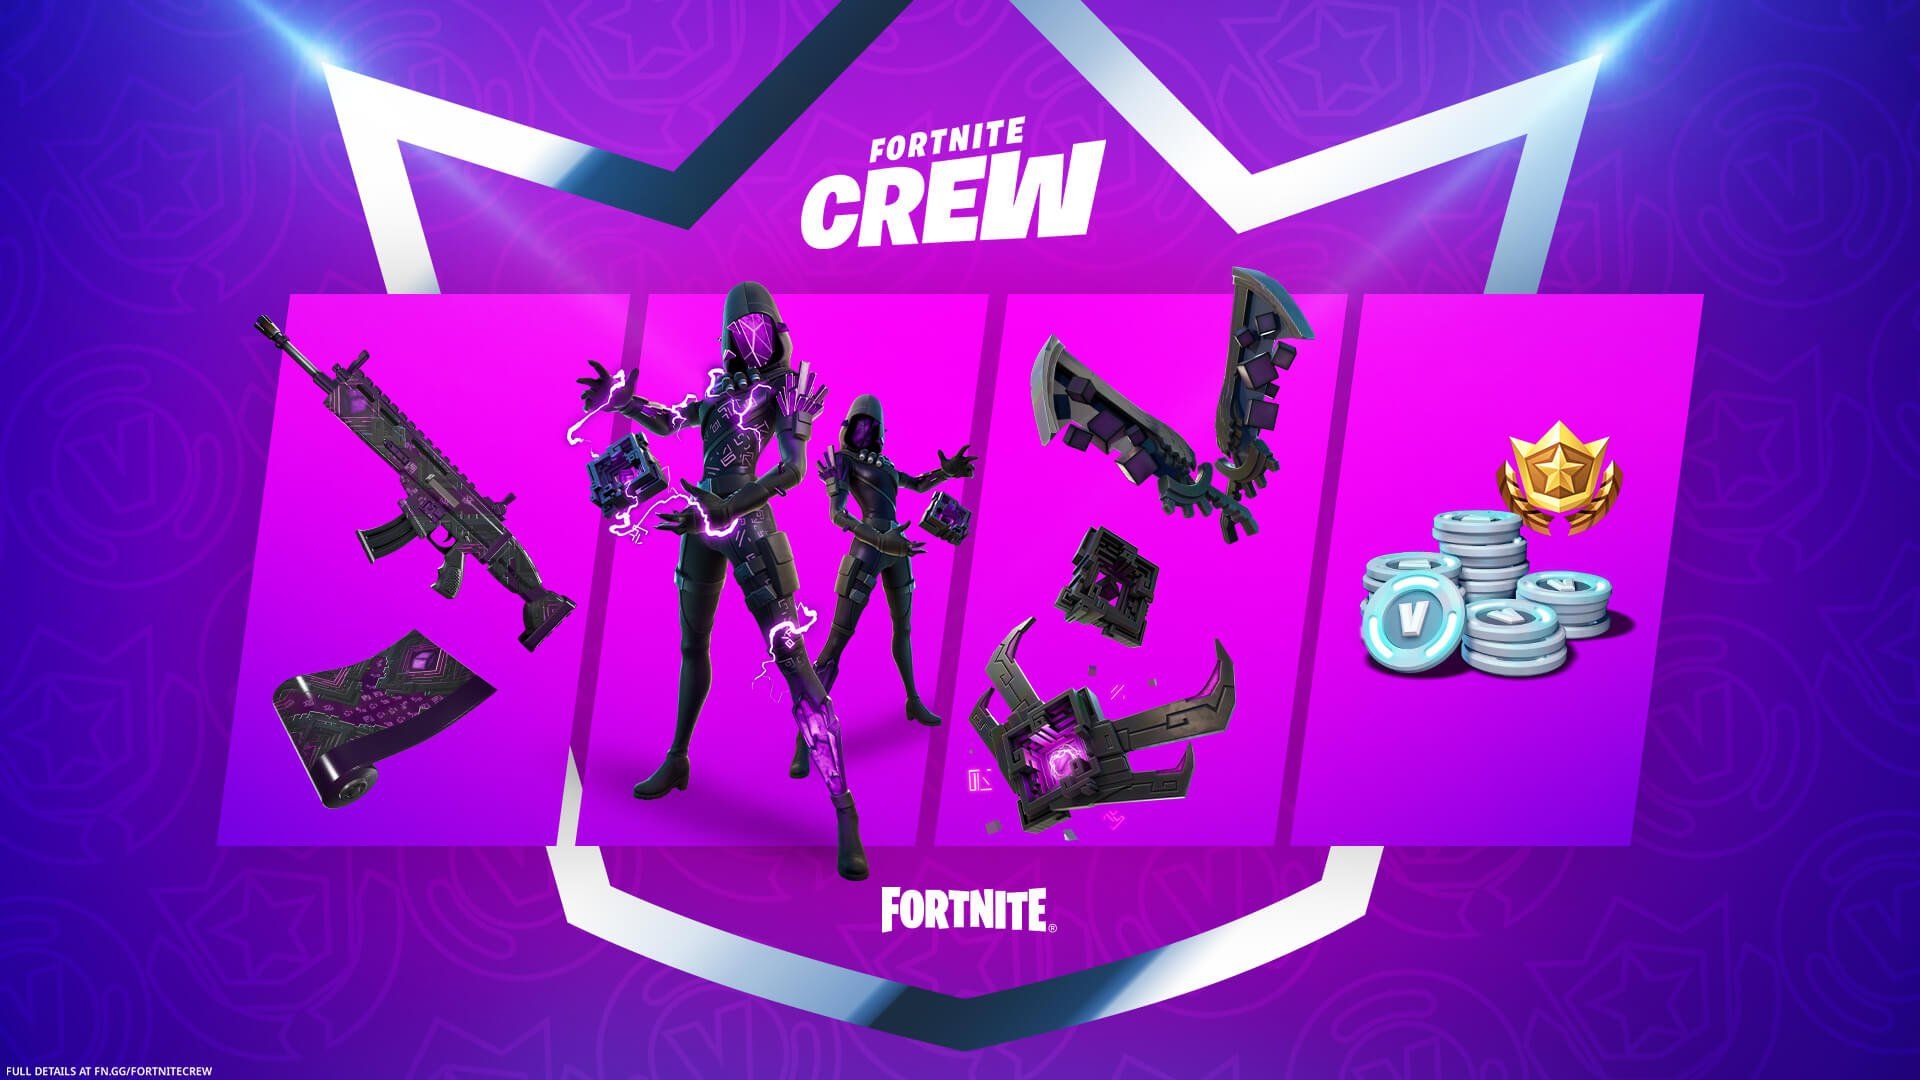 how to get spotify premium fortnite crew pack